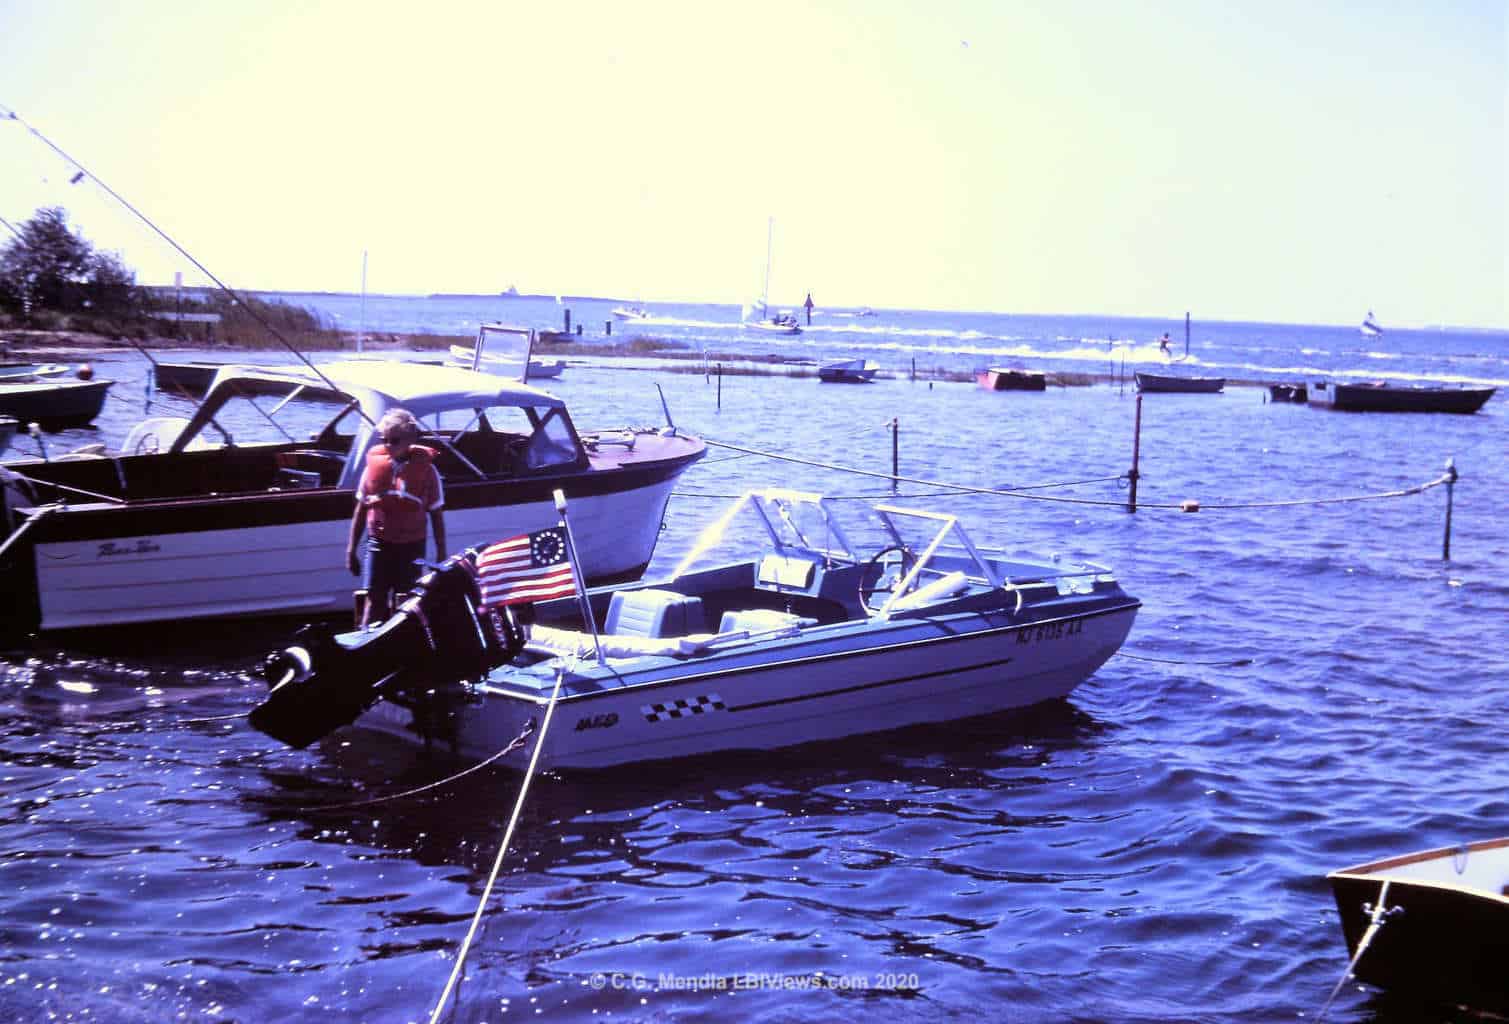 A cove full of boats - North Beach Haven 17th Street - Early 1970's